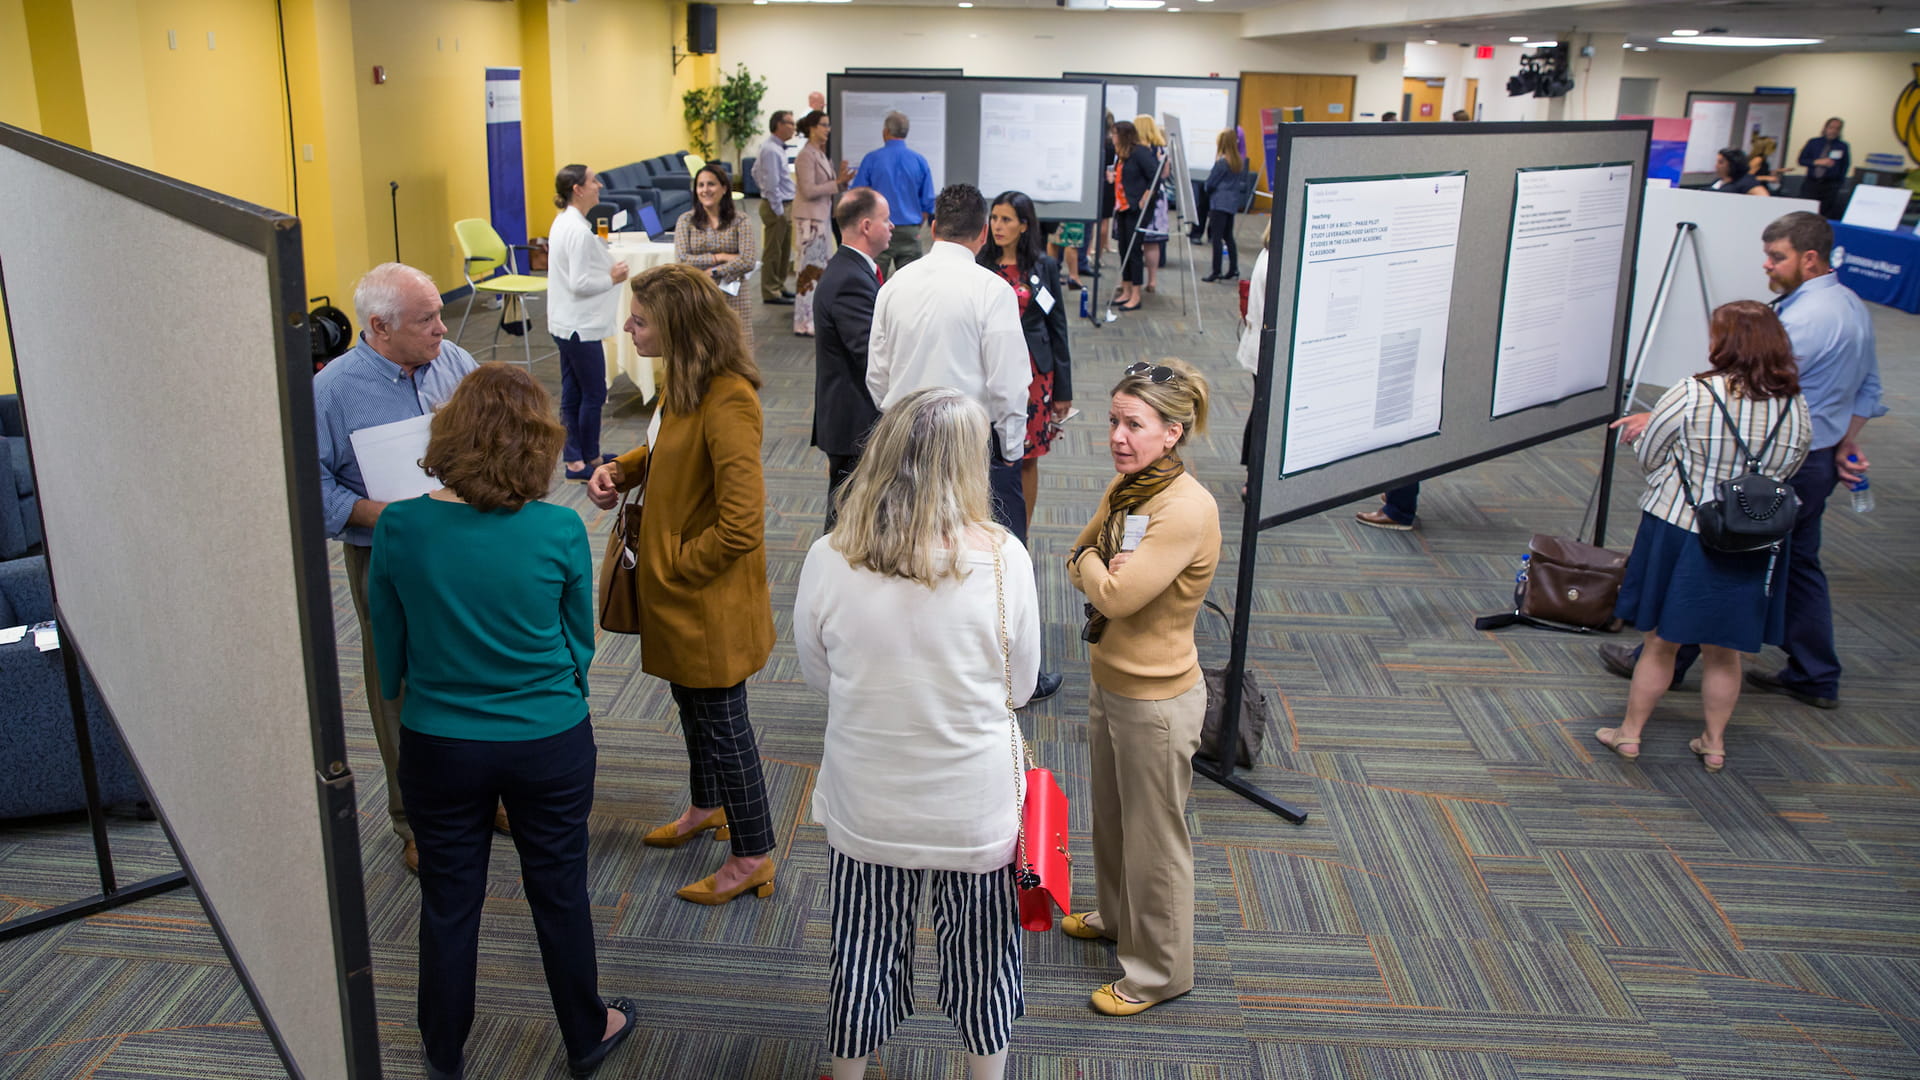 Attendees at the 2019 JWU Faculty Showcase